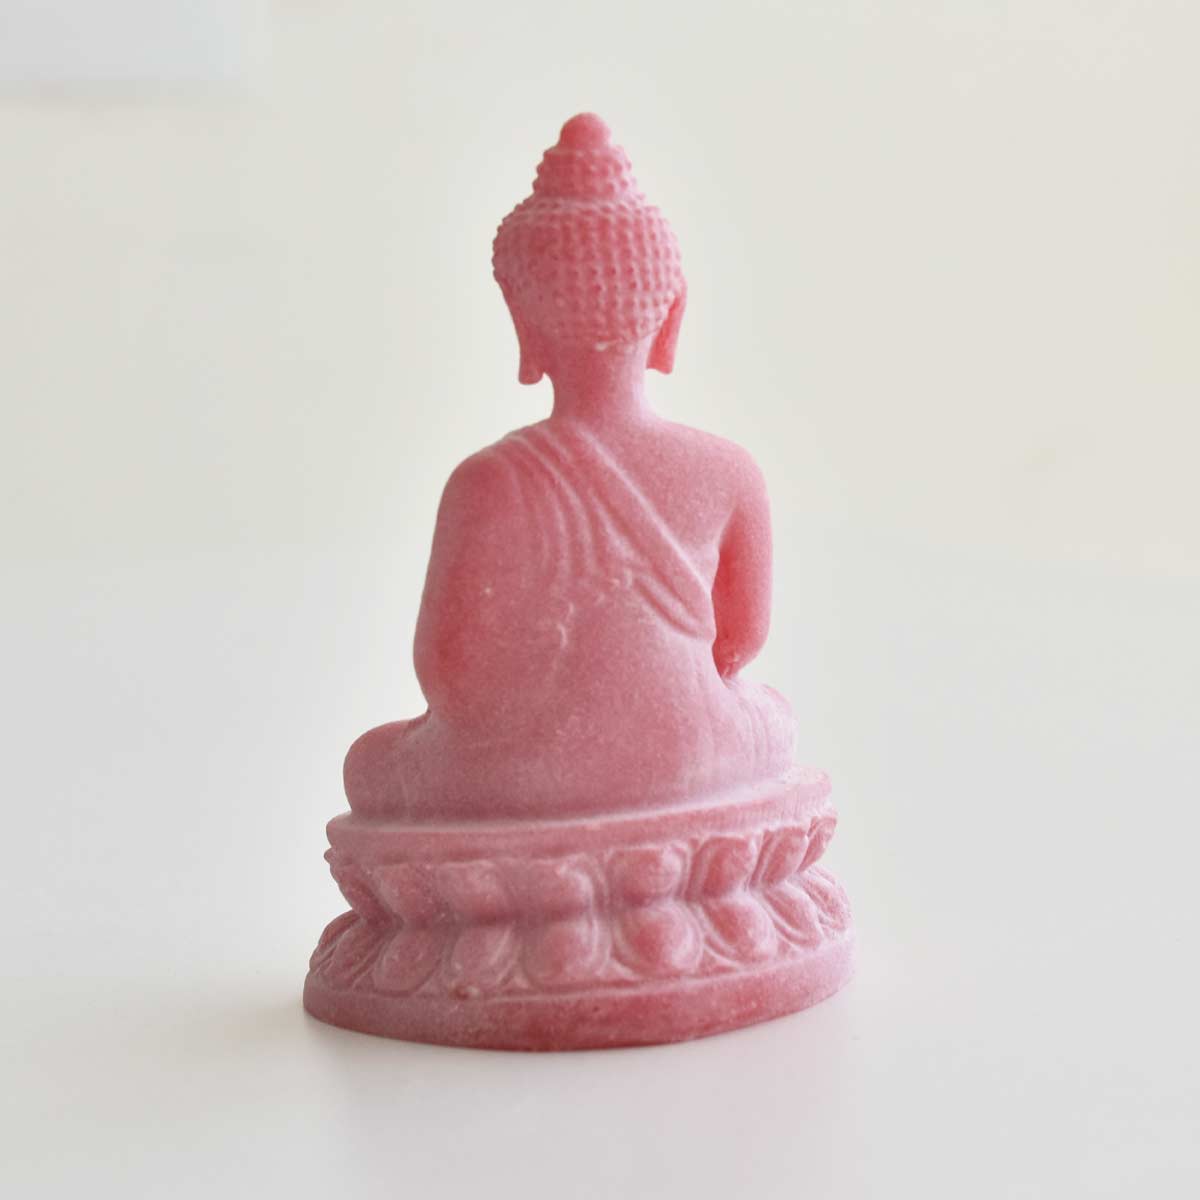 5 Piece Hamper for Mothers Day with Buddha Figure, Cashew Nuts and Greeting Card-3